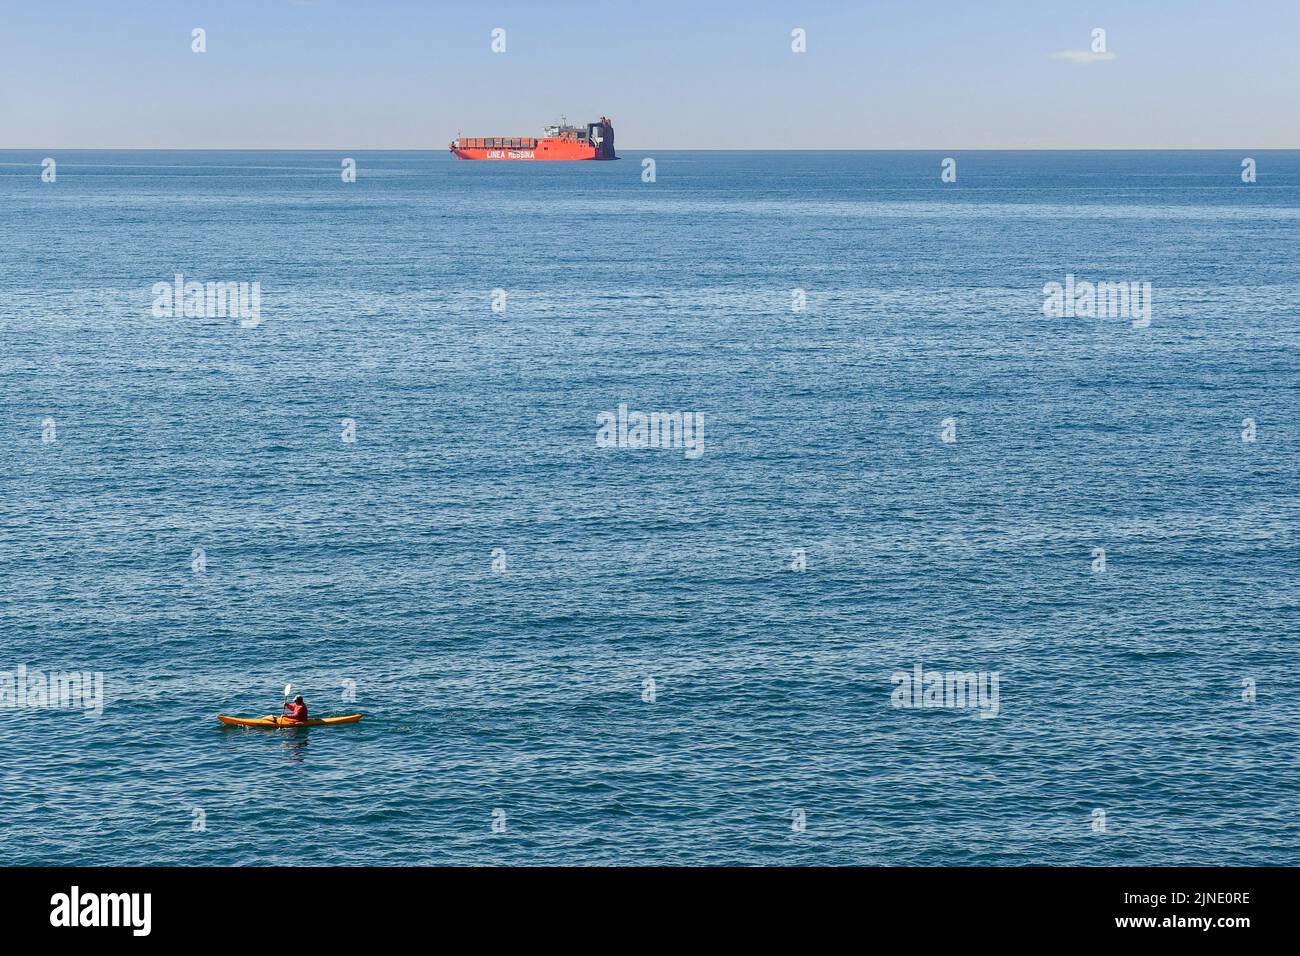 Man kayaking on the shore with a container ship of the Linea Messina, a shipping company based in Genoa, on the sea horizon, Nervi, Genoa, Liguria Stock Photo